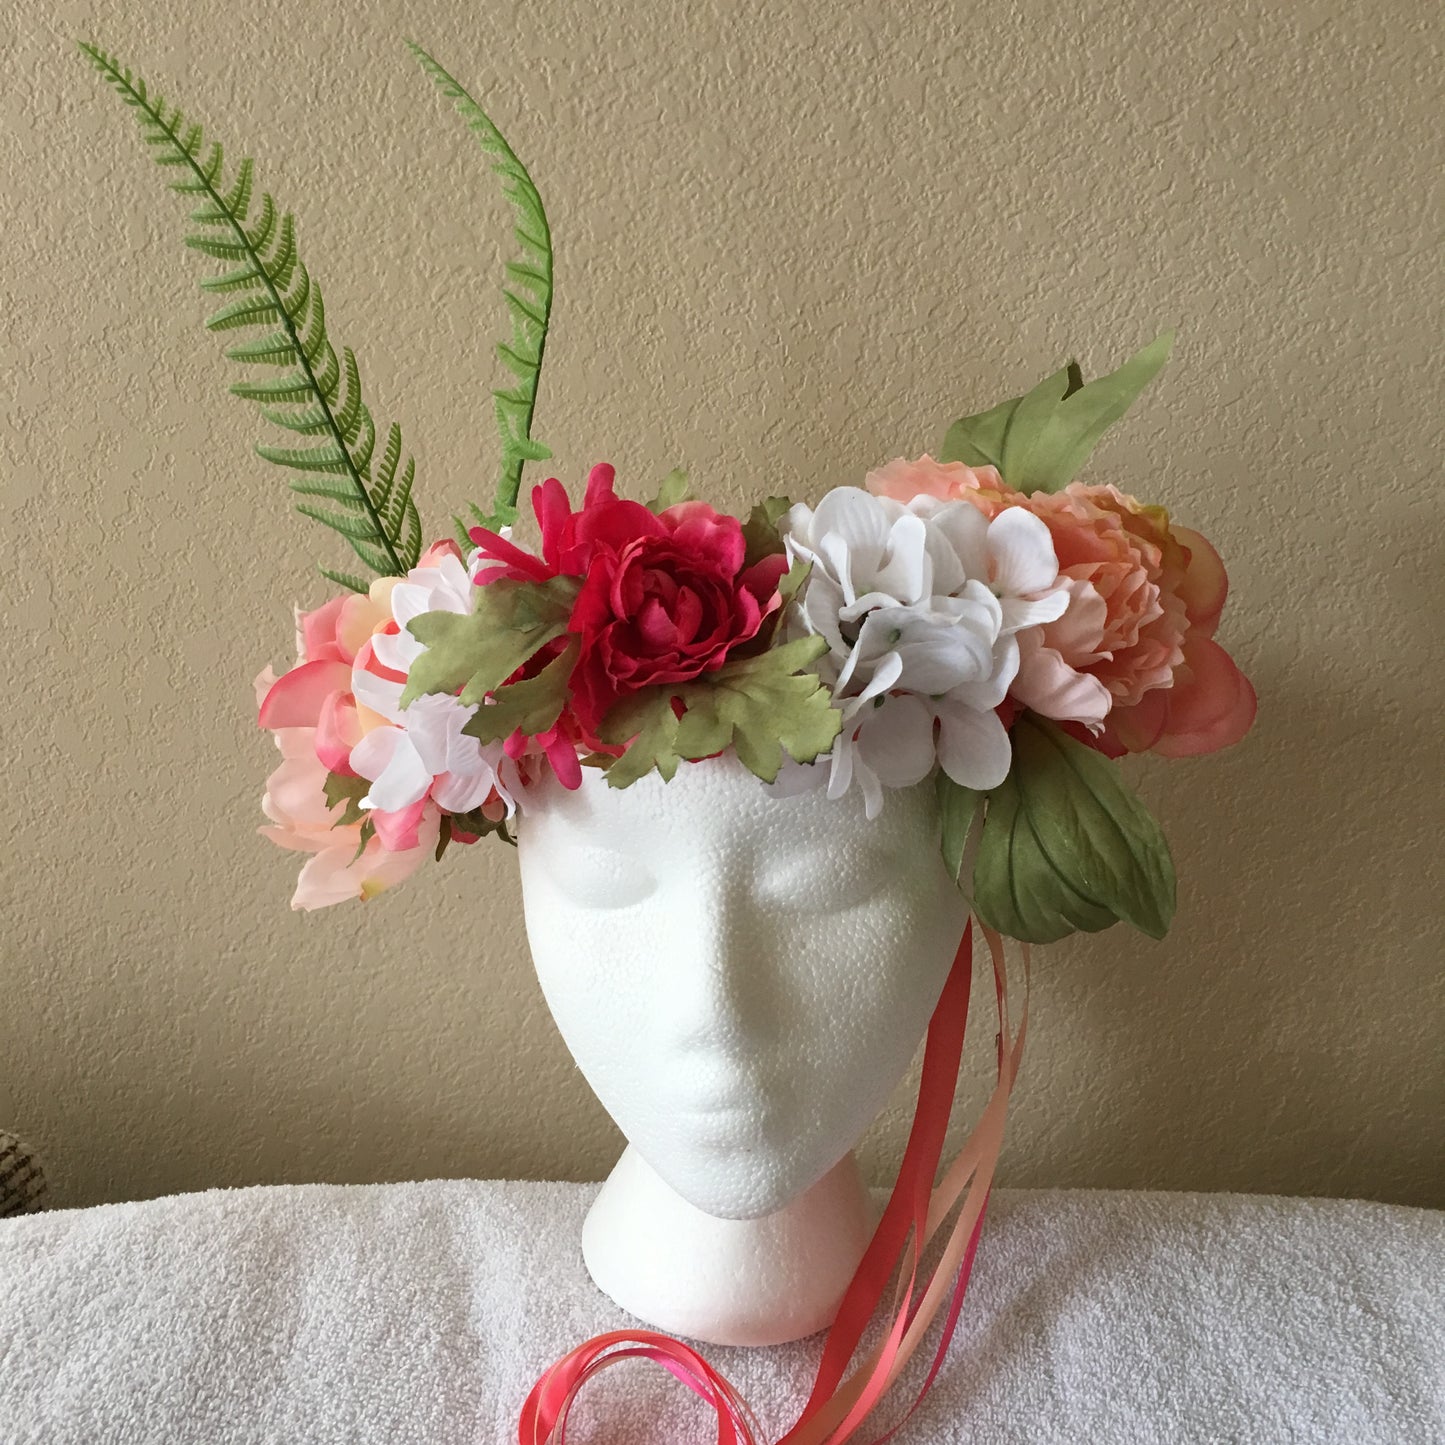 Large Wreath - White, peach, & pink flowers